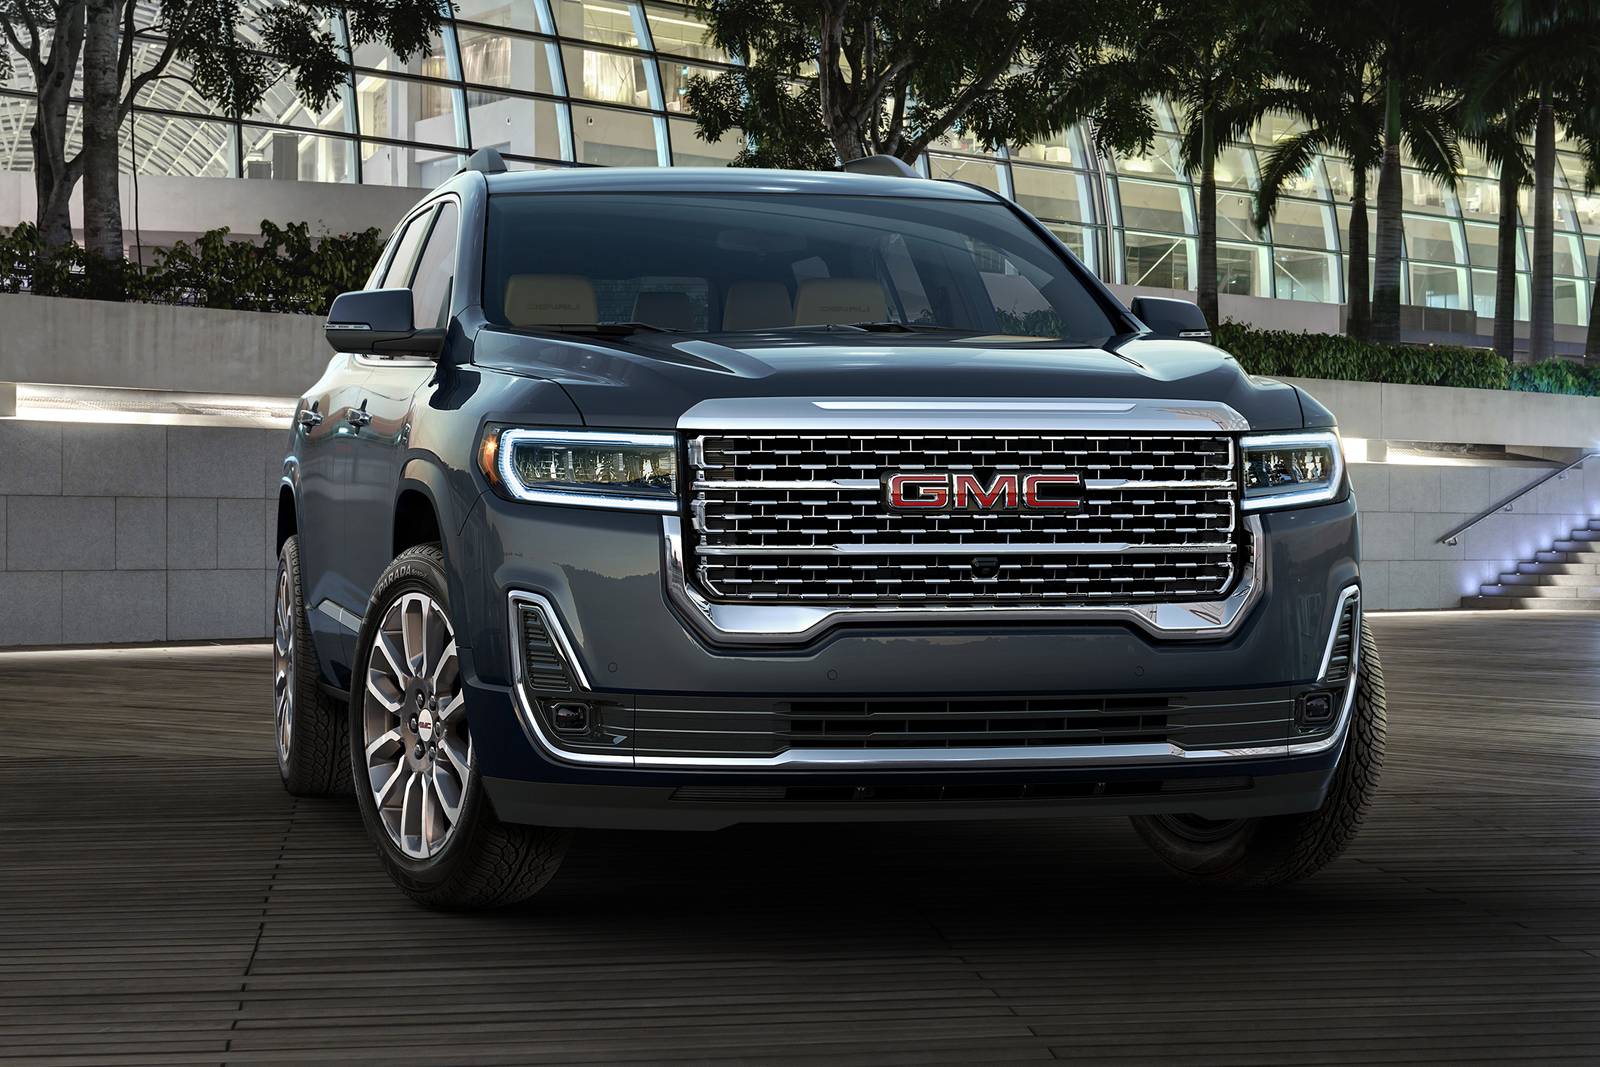 2021 Gmc Acadia Release Date Price and Review